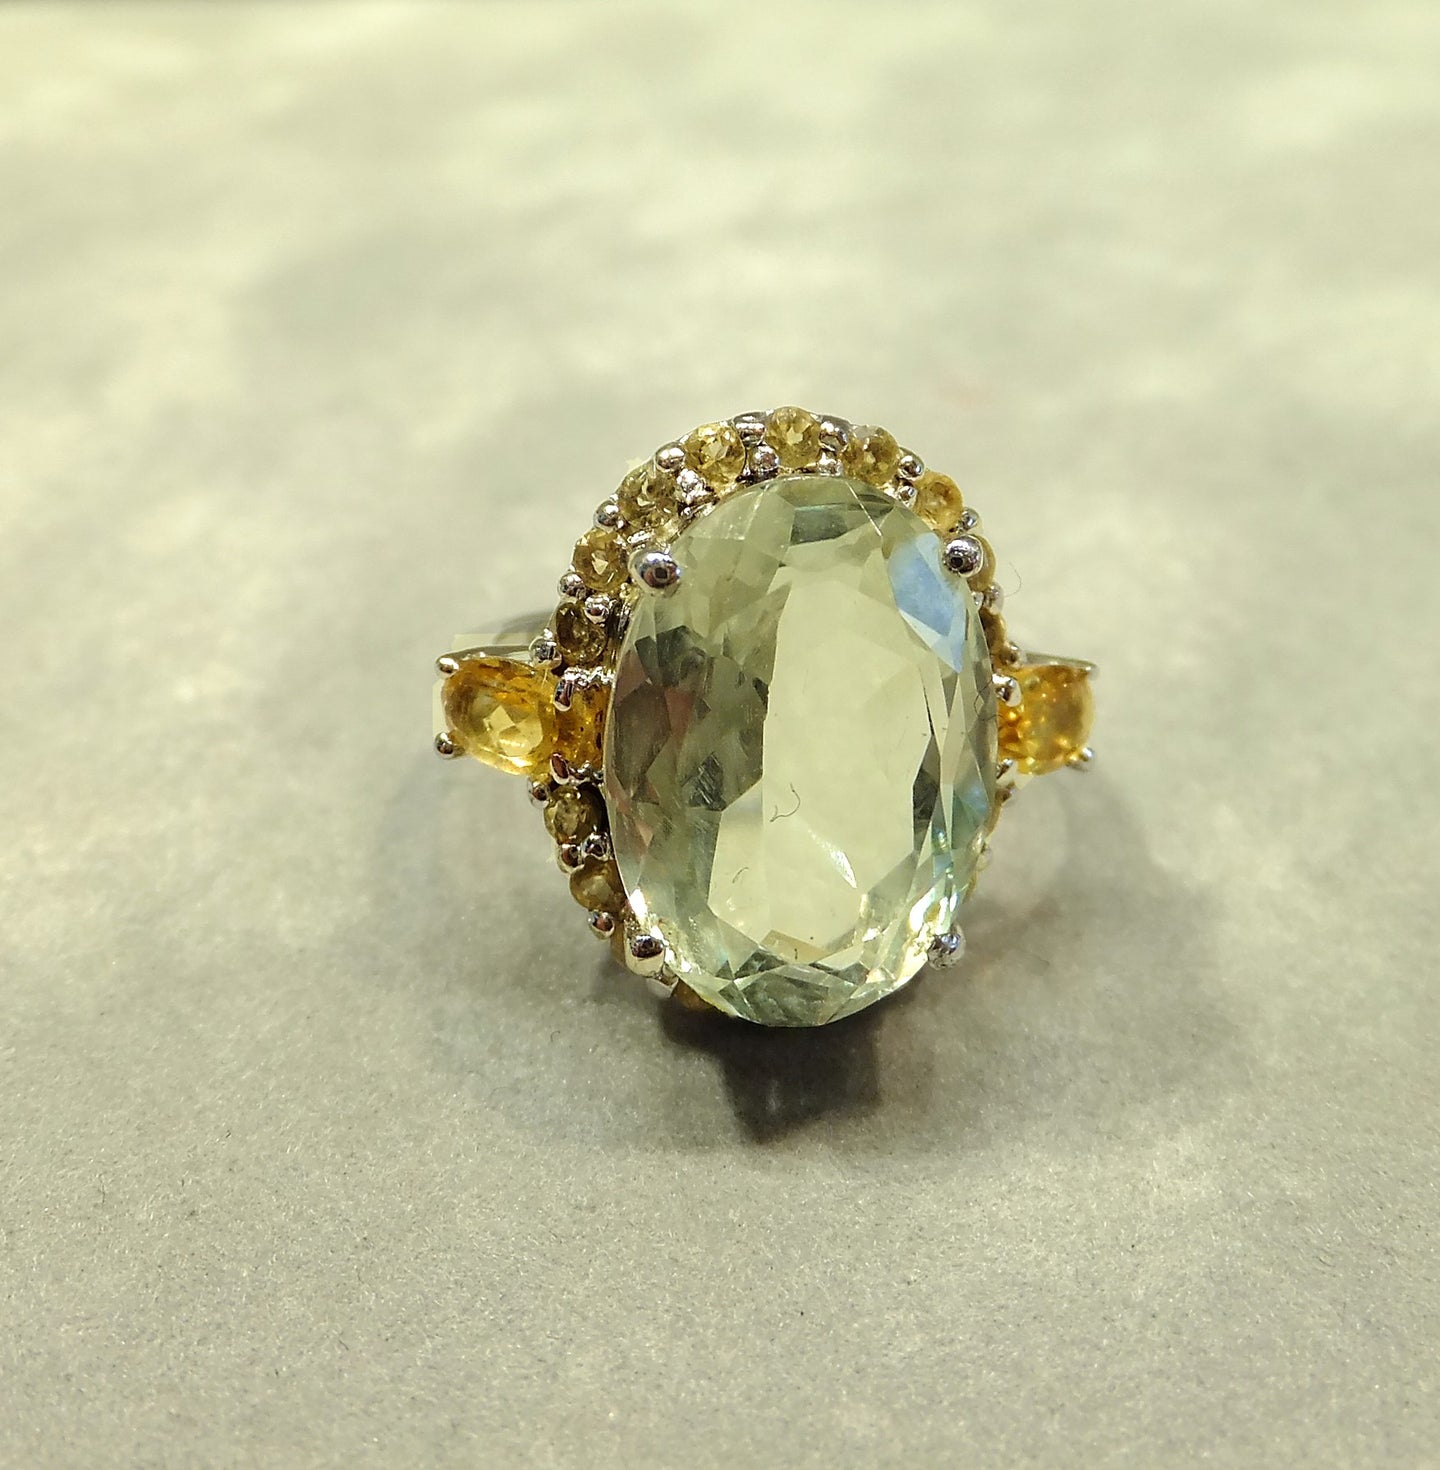 Oval Green Amethyst and Citrine Gemstone Ring